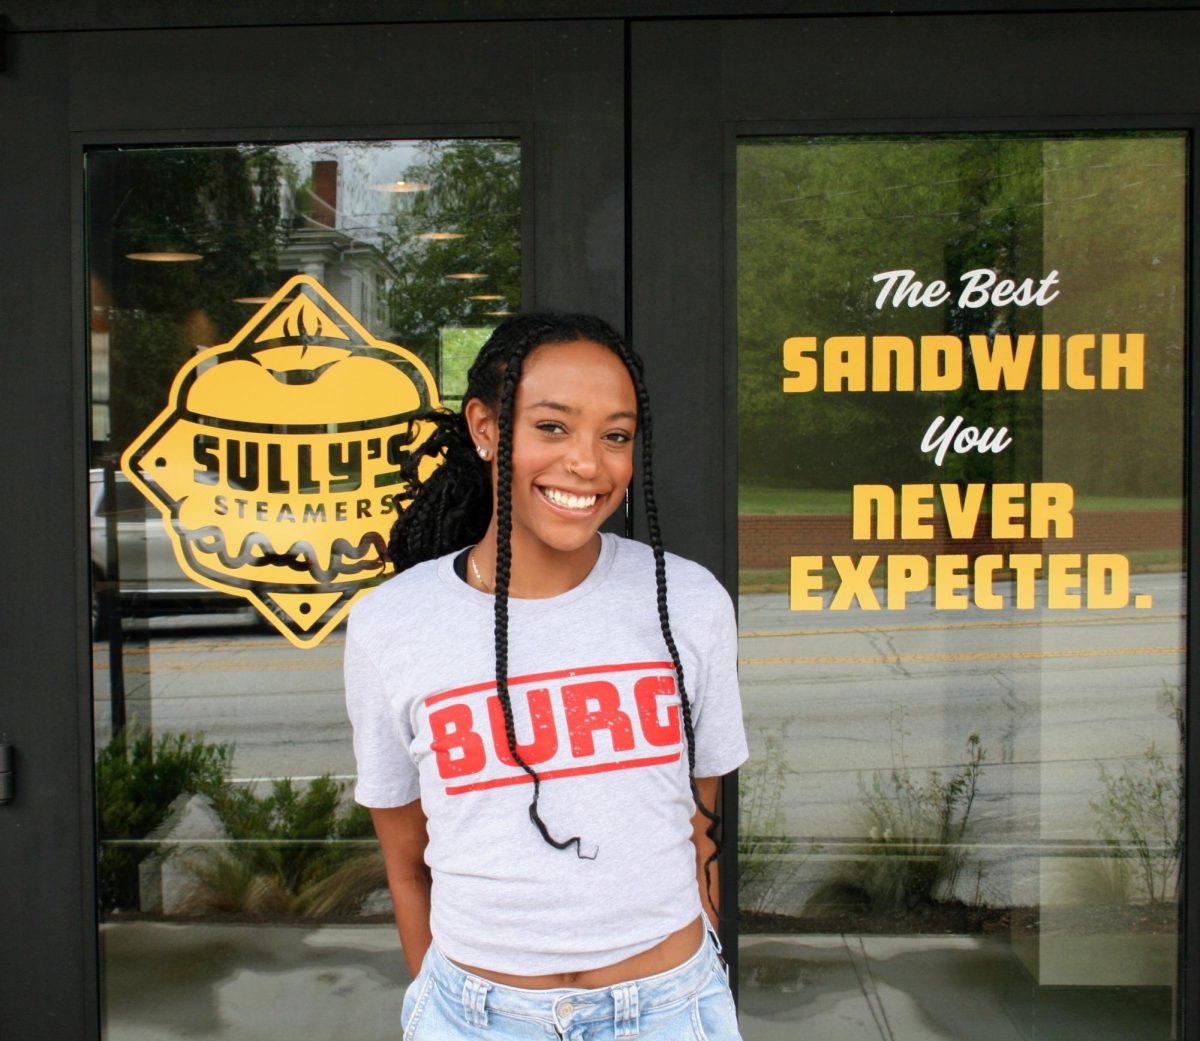 Jazzy Jeferson ‘24 is the first Wofford athlete to receive an NIL deal. 
Jefferson partnered with Sully’s Steamers for her deal.